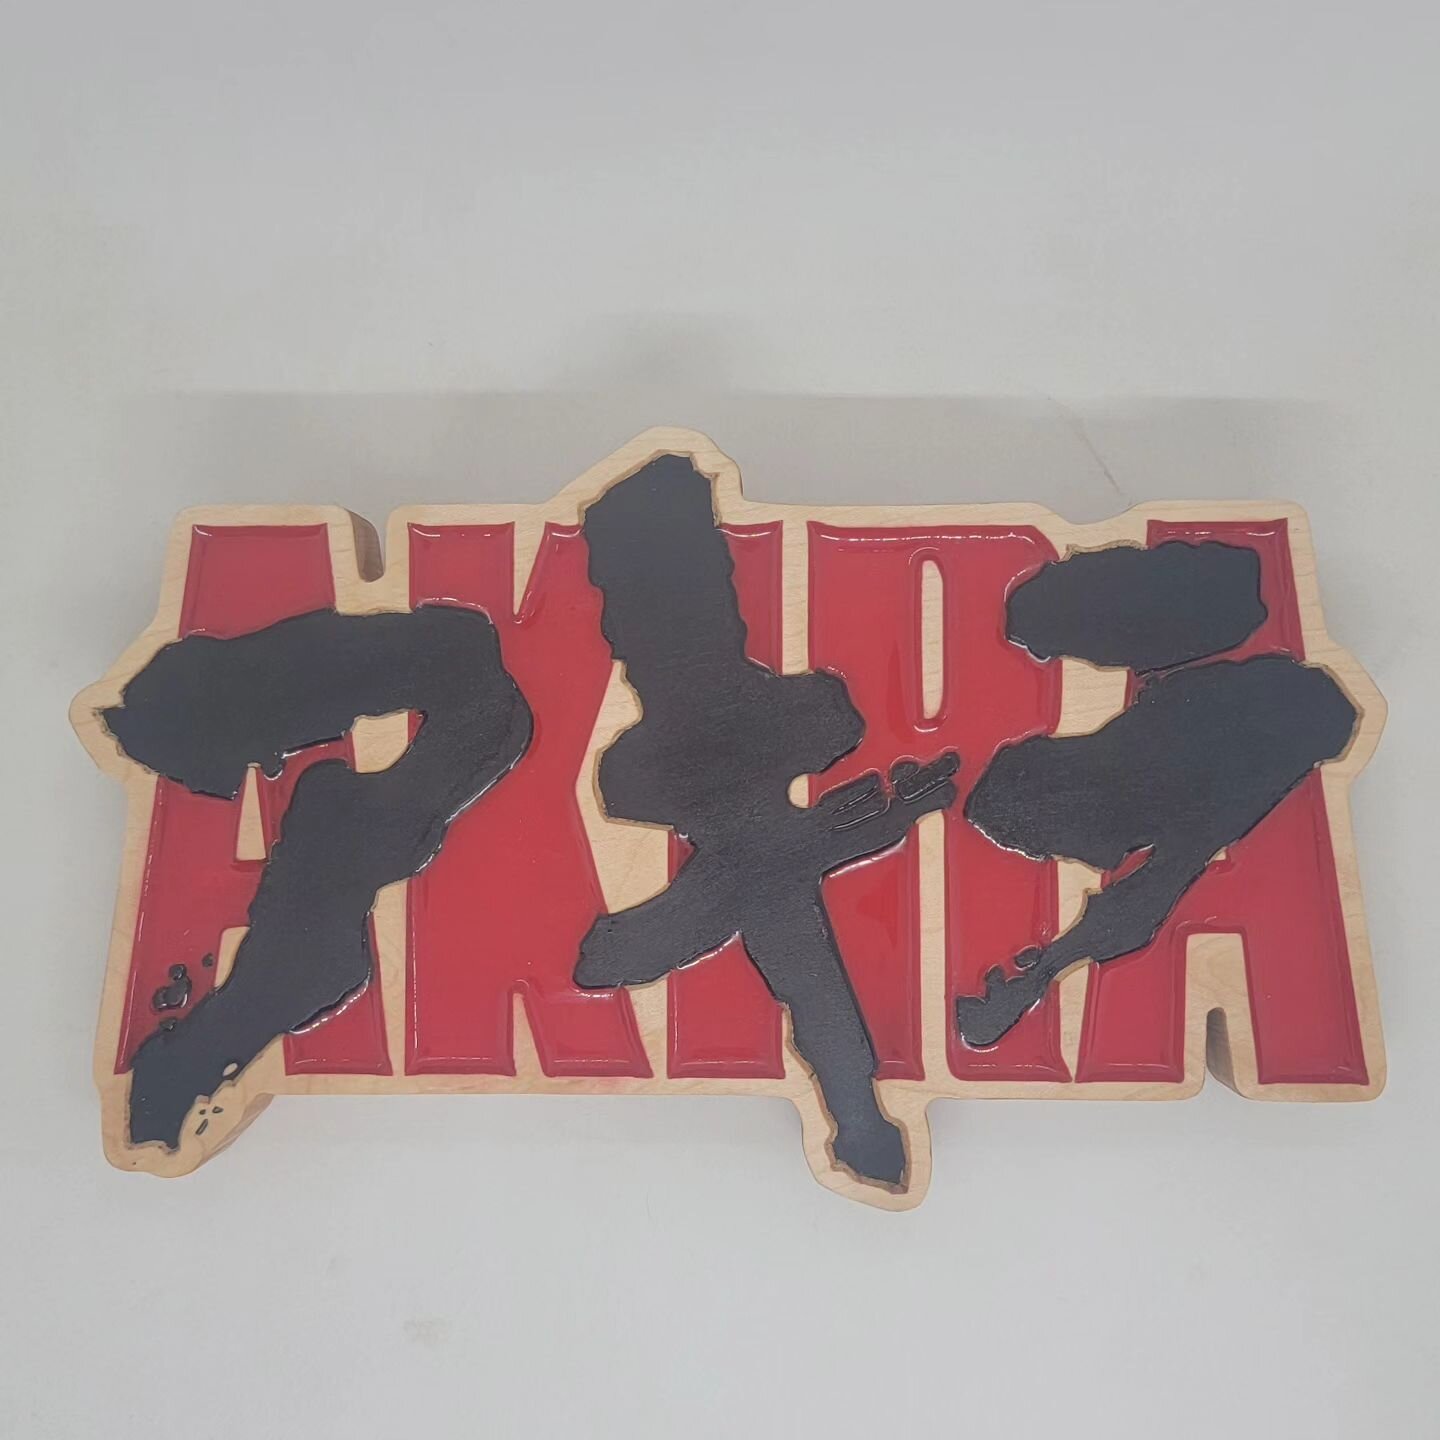 I'm super happy with how this turned out! Akira carving in maple with a super thin coat of epoxy on the red! 
&bull;
&bull;
&bull;
&bull;
&bull;
#carpentry #carving #new #smallshop #smallbusiness #custommade #custom #customsign #sign #maple #anime #a